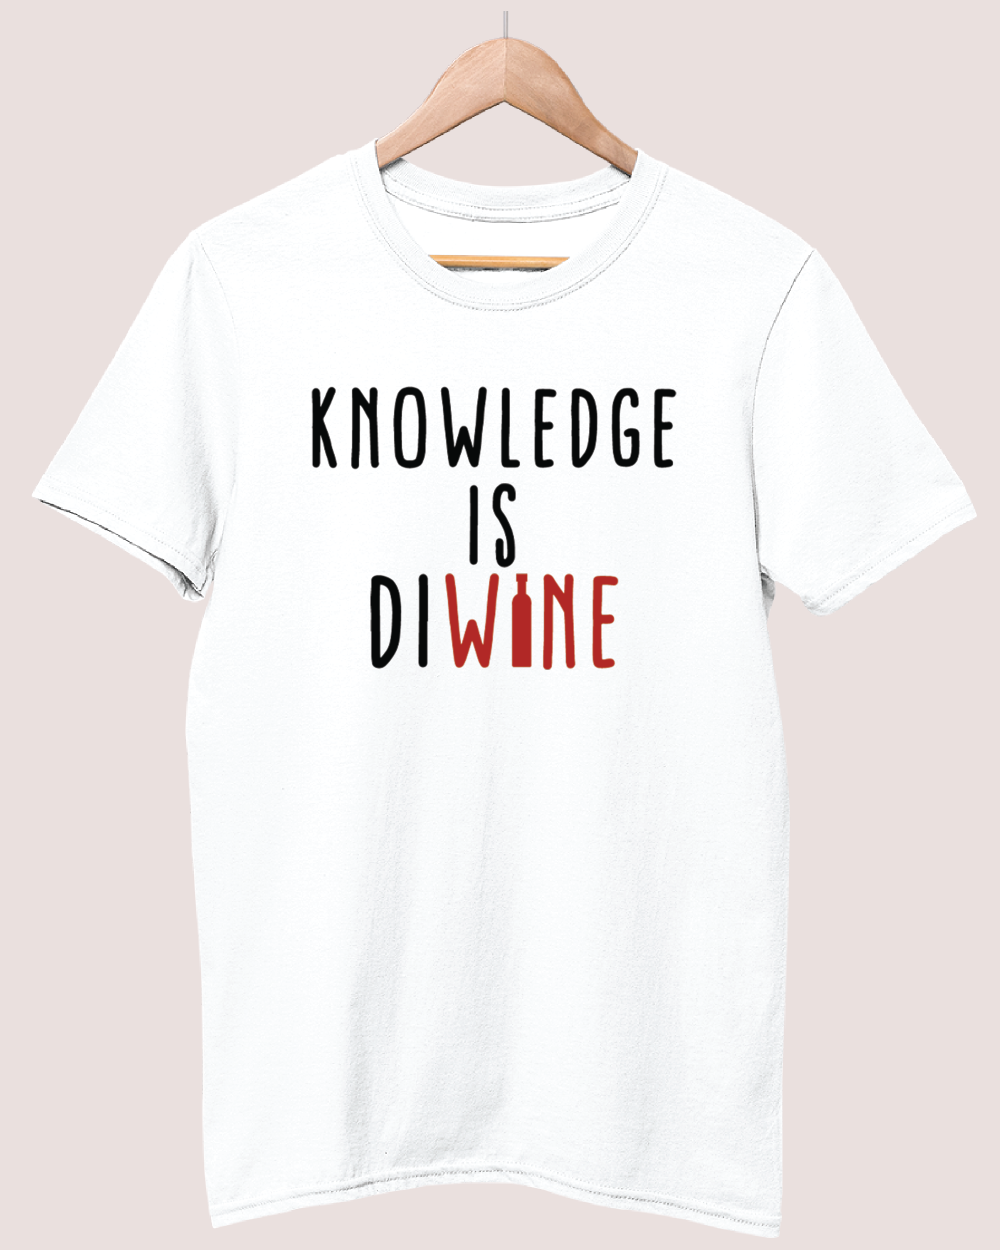 Knowledge is diwine T-shirt